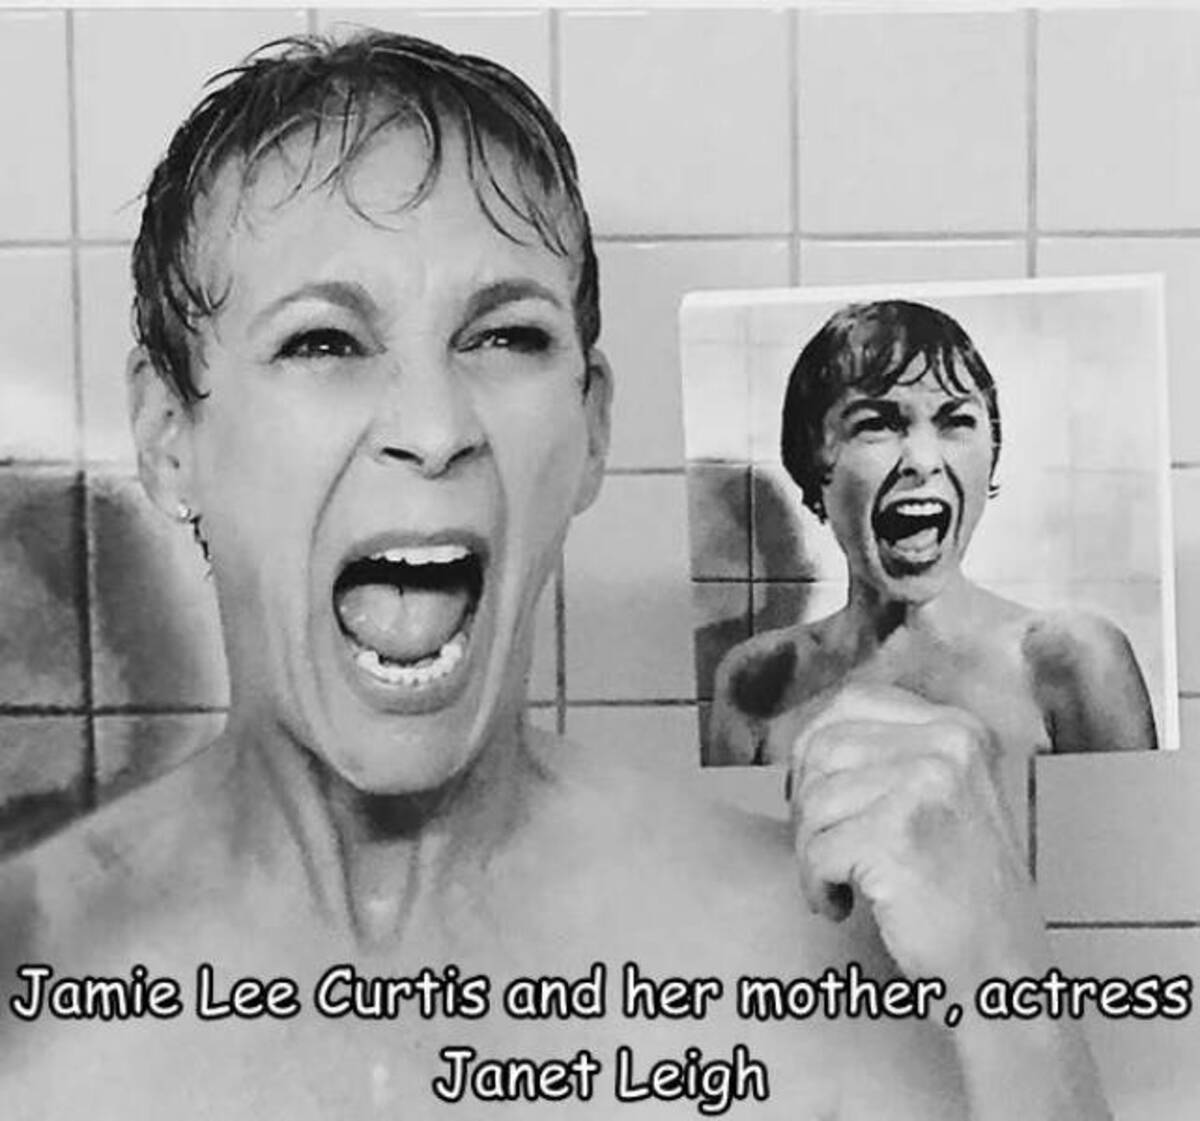 photo caption - Jamie Lee Curtis and her mother, actress Janet Leigh